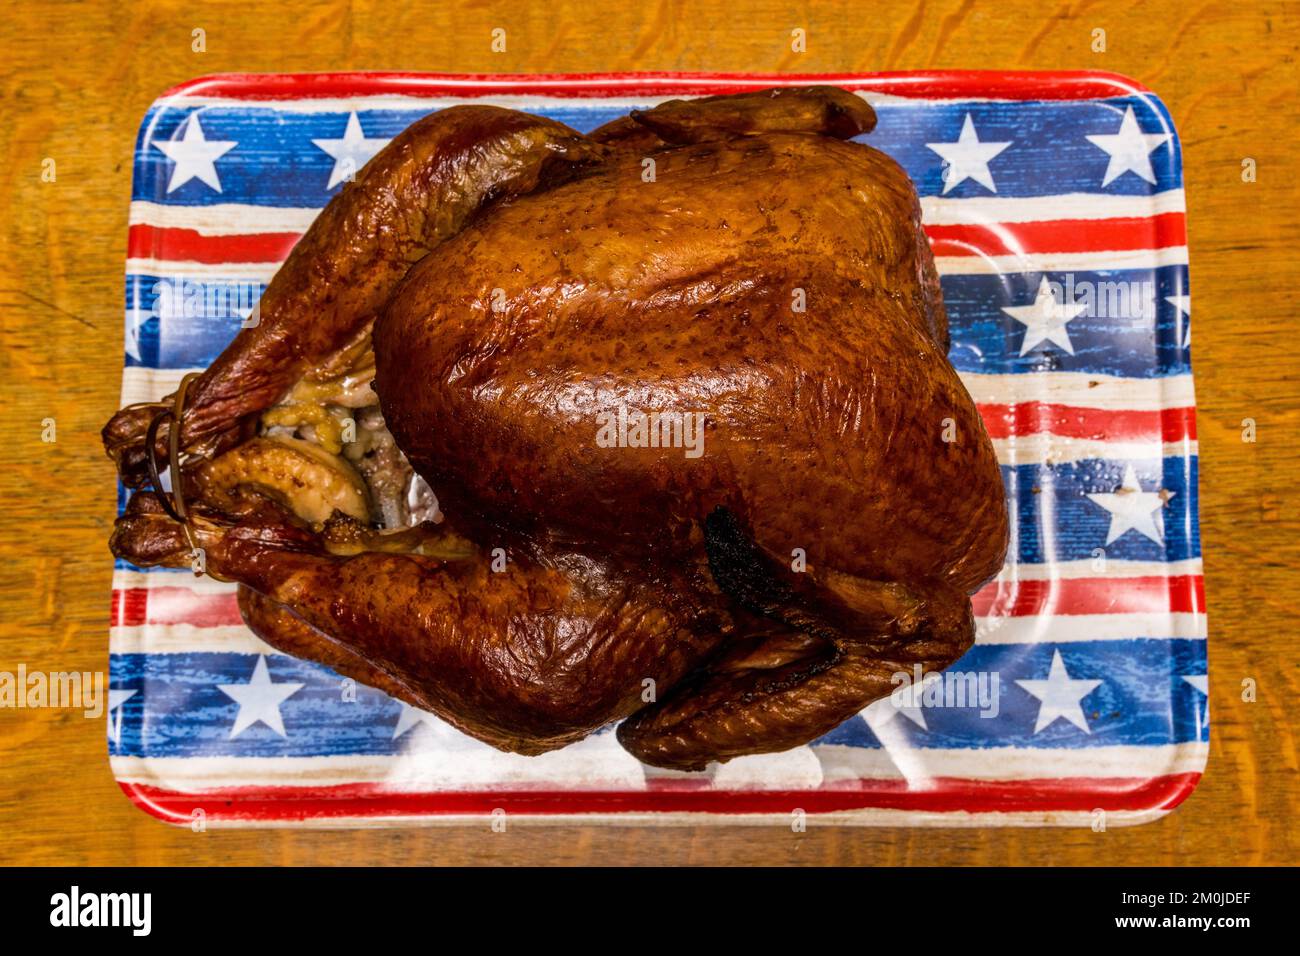 A Foster Farms Thanksgiving turkey smoked with apple wood on a Weber kettle barbecue Stock Photo